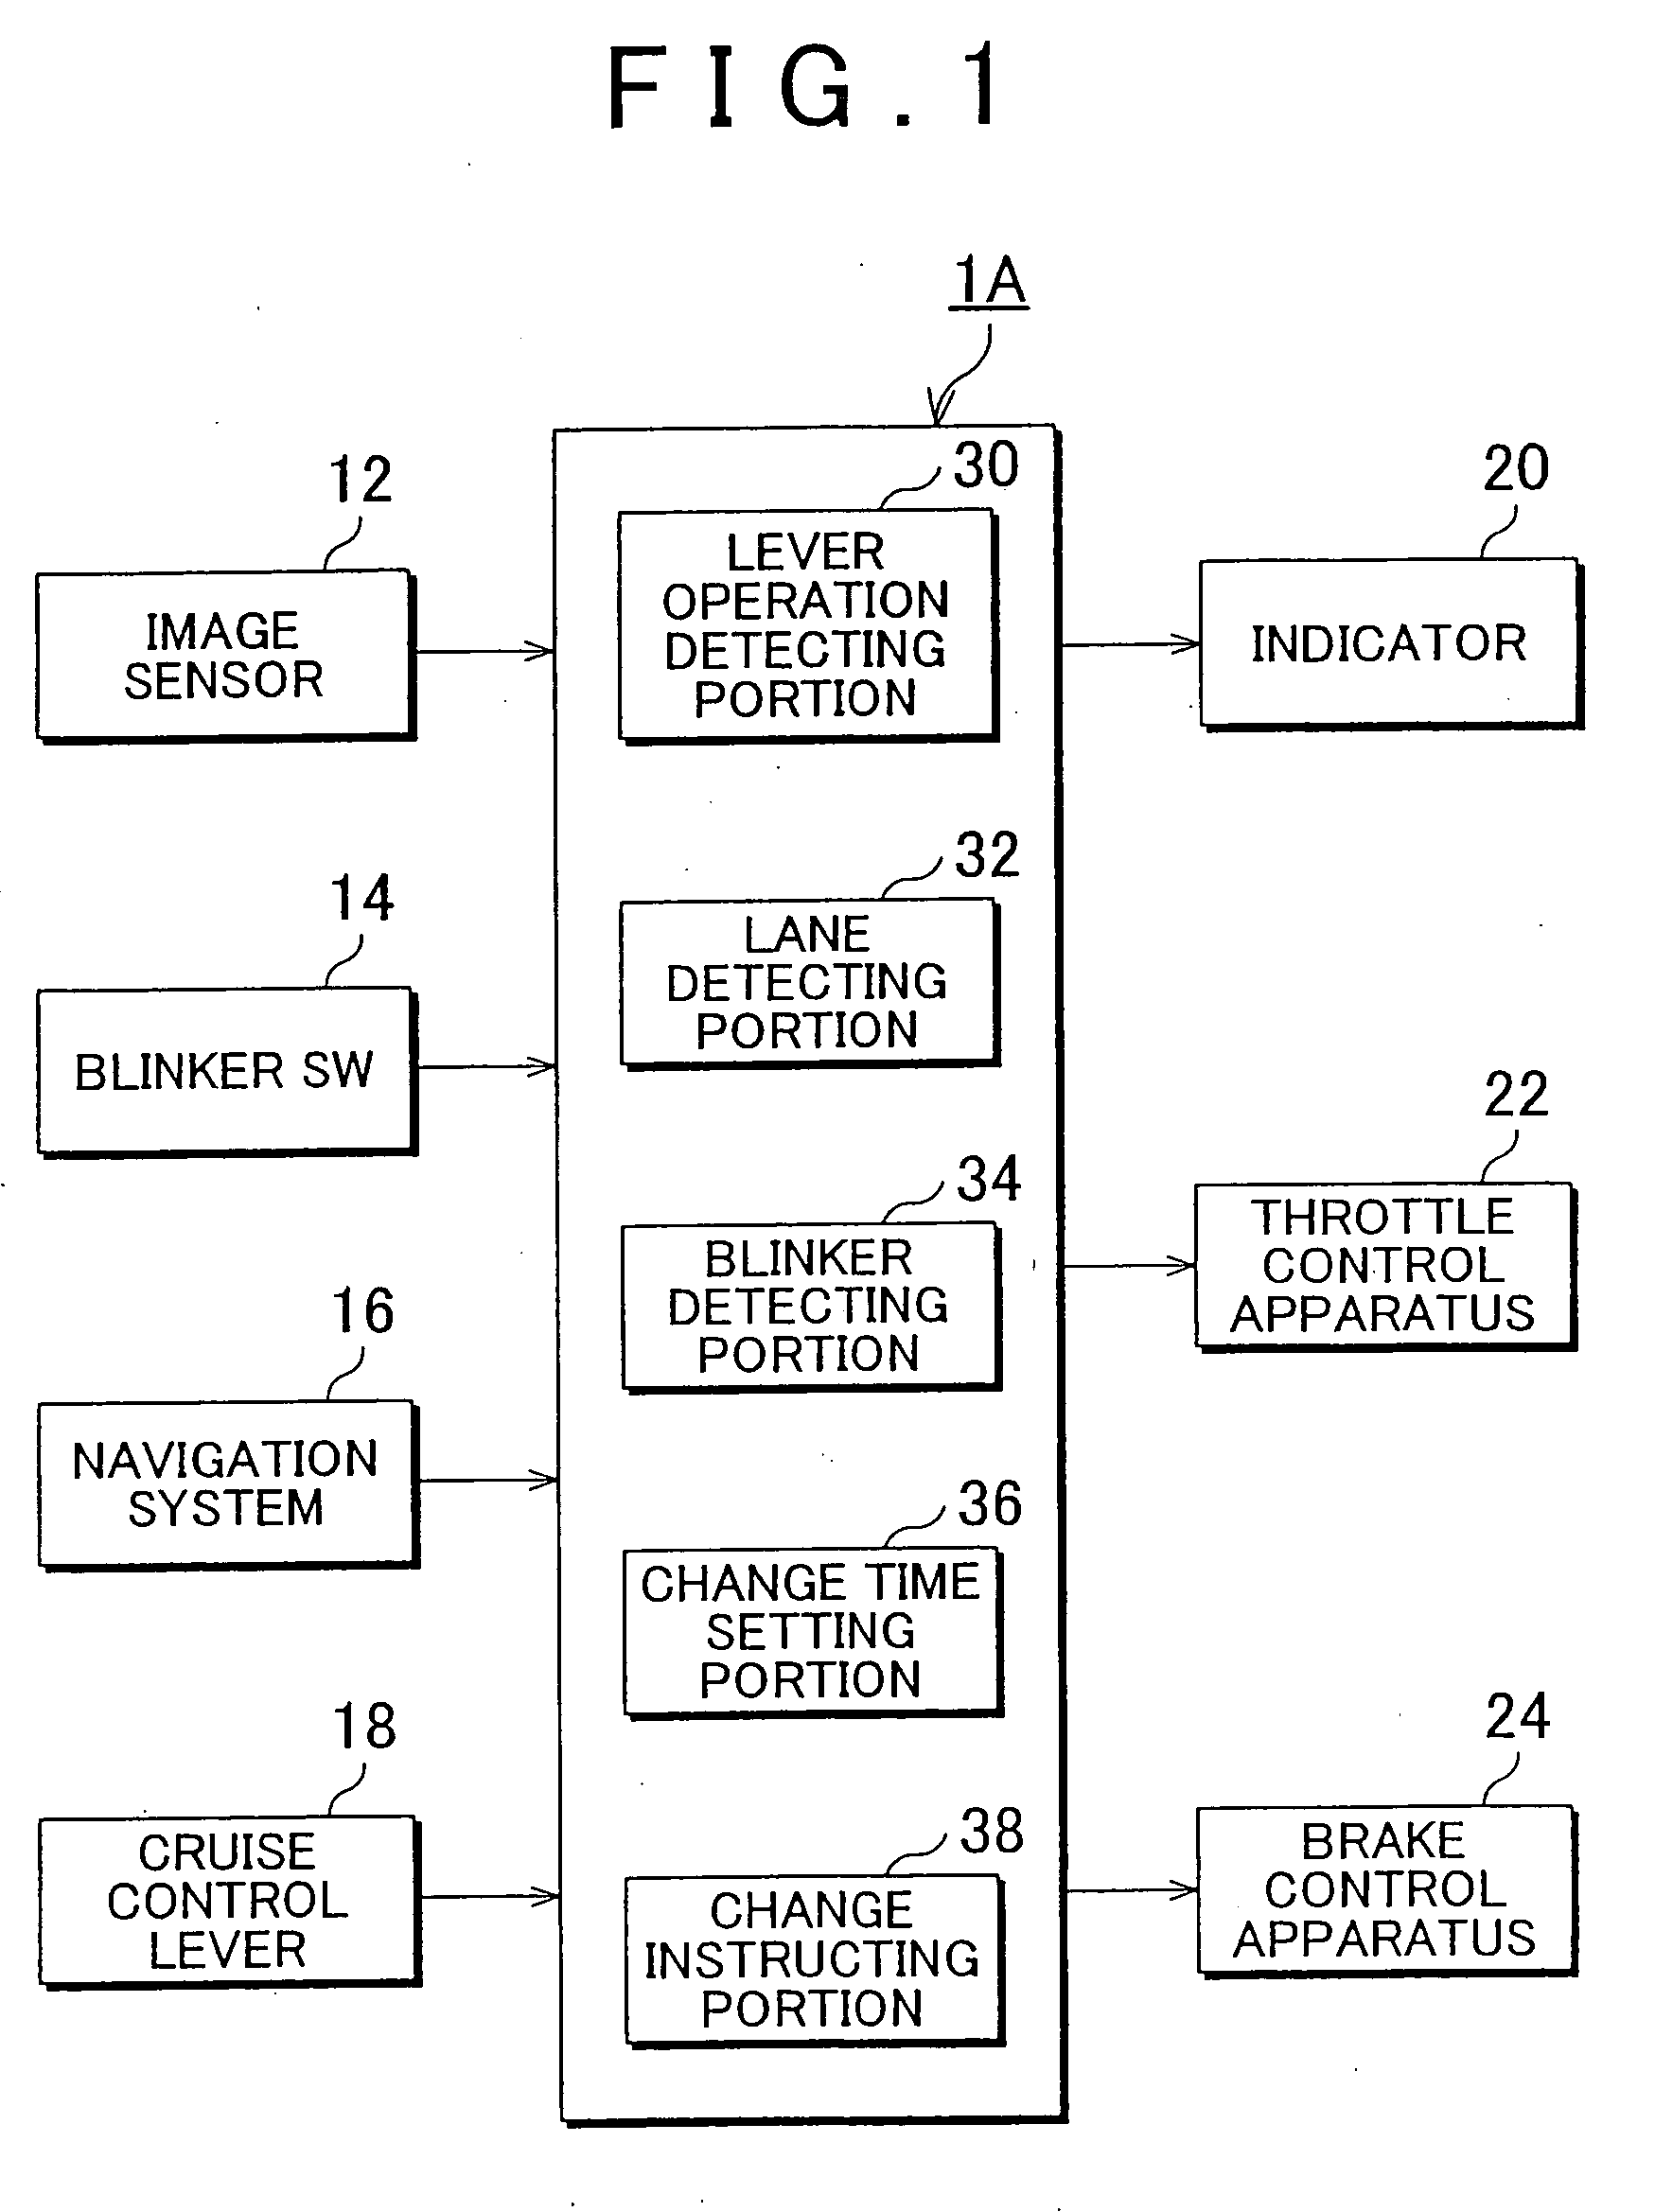 Apparatus for changing a vehicle speed setting of cruise control